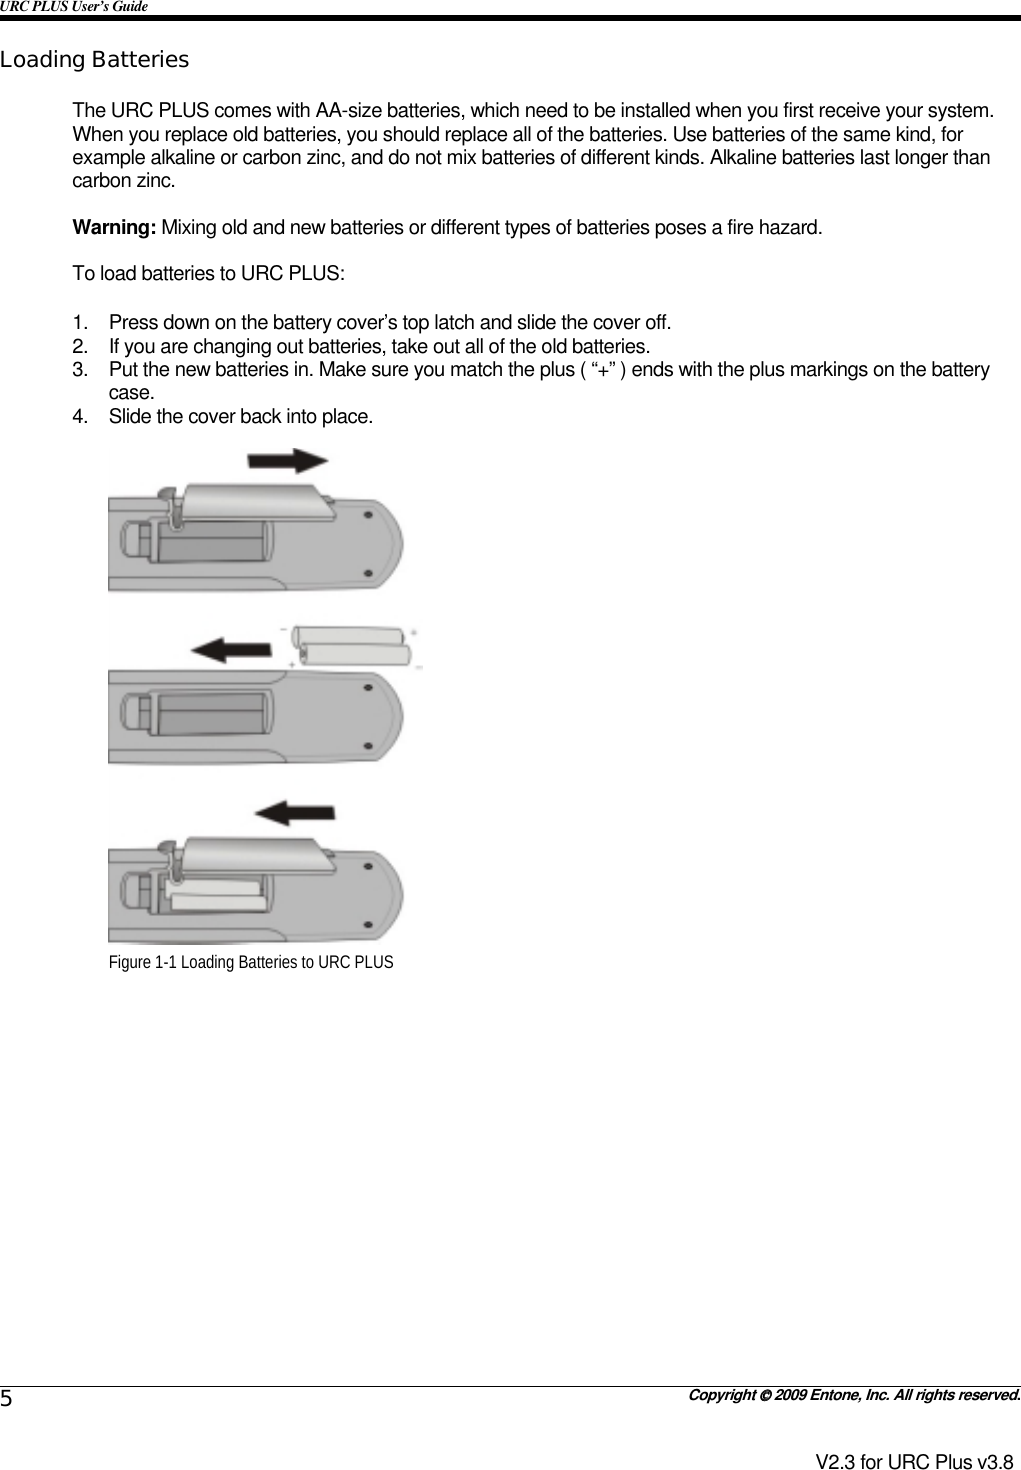 URC PLUS User’s Guide   Copyright  2009 Entone, Inc. All rights reserved. 5 V2.3 for URC Plus v3.8 Loading Batteries The URC PLUS comes with AA-size batteries, which need to be installed when you first receive your system. When you replace old batteries, you should replace all of the batteries. Use batteries of the same kind, for example alkaline or carbon zinc, and do not mix batteries of different kinds. Alkaline batteries last longer than carbon zinc.  Warning: Mixing old and new batteries or different types of batteries poses a fire hazard.  To load batteries to URC PLUS:  1.  Press down on the battery cover’s top latch and slide the cover off. 2.  If you are changing out batteries, take out all of the old batteries. 3.  Put the new batteries in. Make sure you match the plus ( “+” ) ends with the plus markings on the battery case. 4.  Slide the cover back into place.   Figure 1-1 Loading Batteries to URC PLUS    